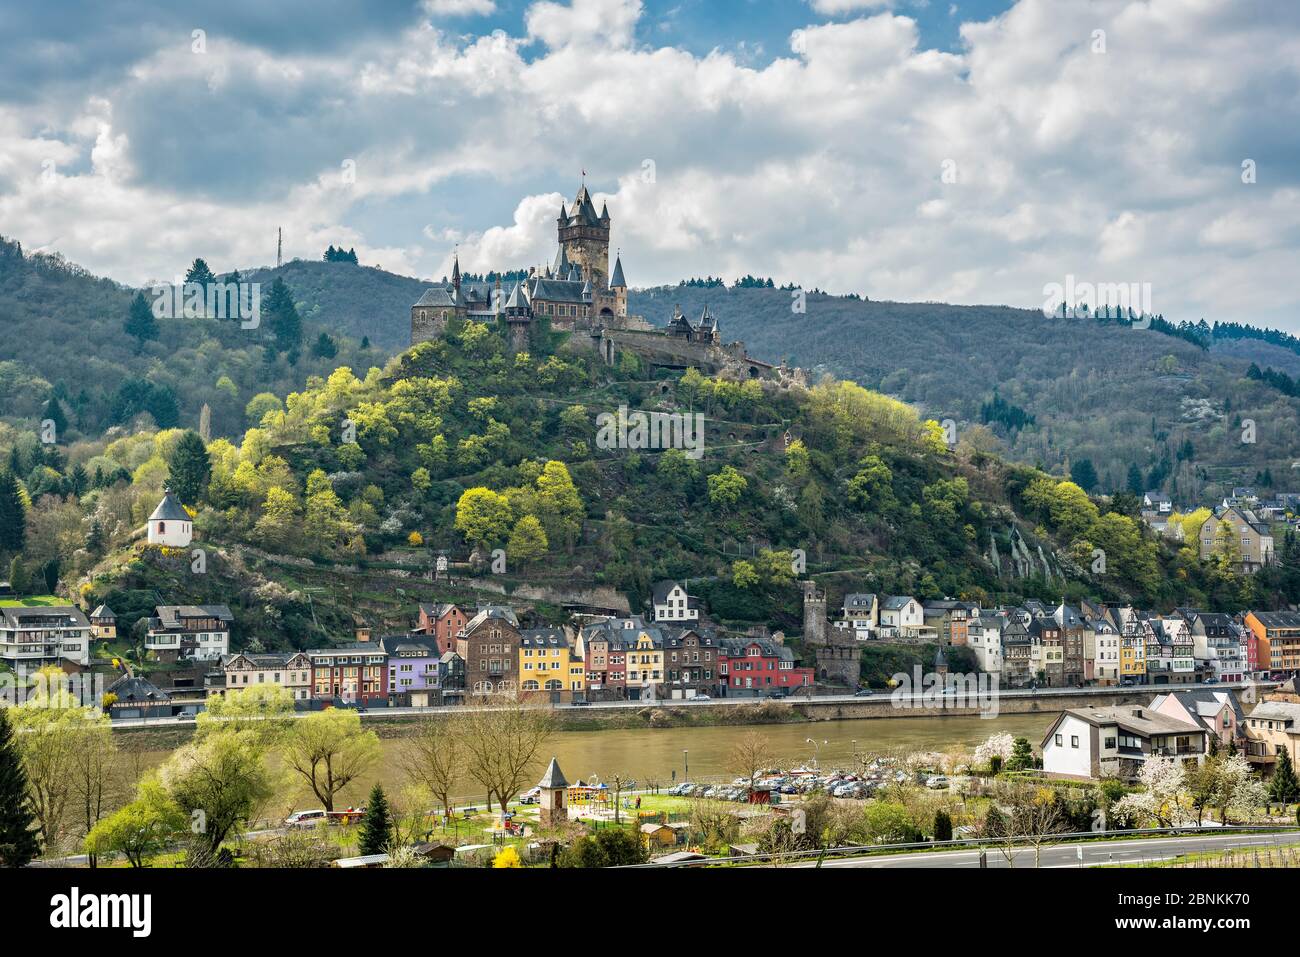 Reichsburg Cochem, castle romance on the Moselle, landmark and cultural asset in the sense of the Hague Convention. Stock Photo